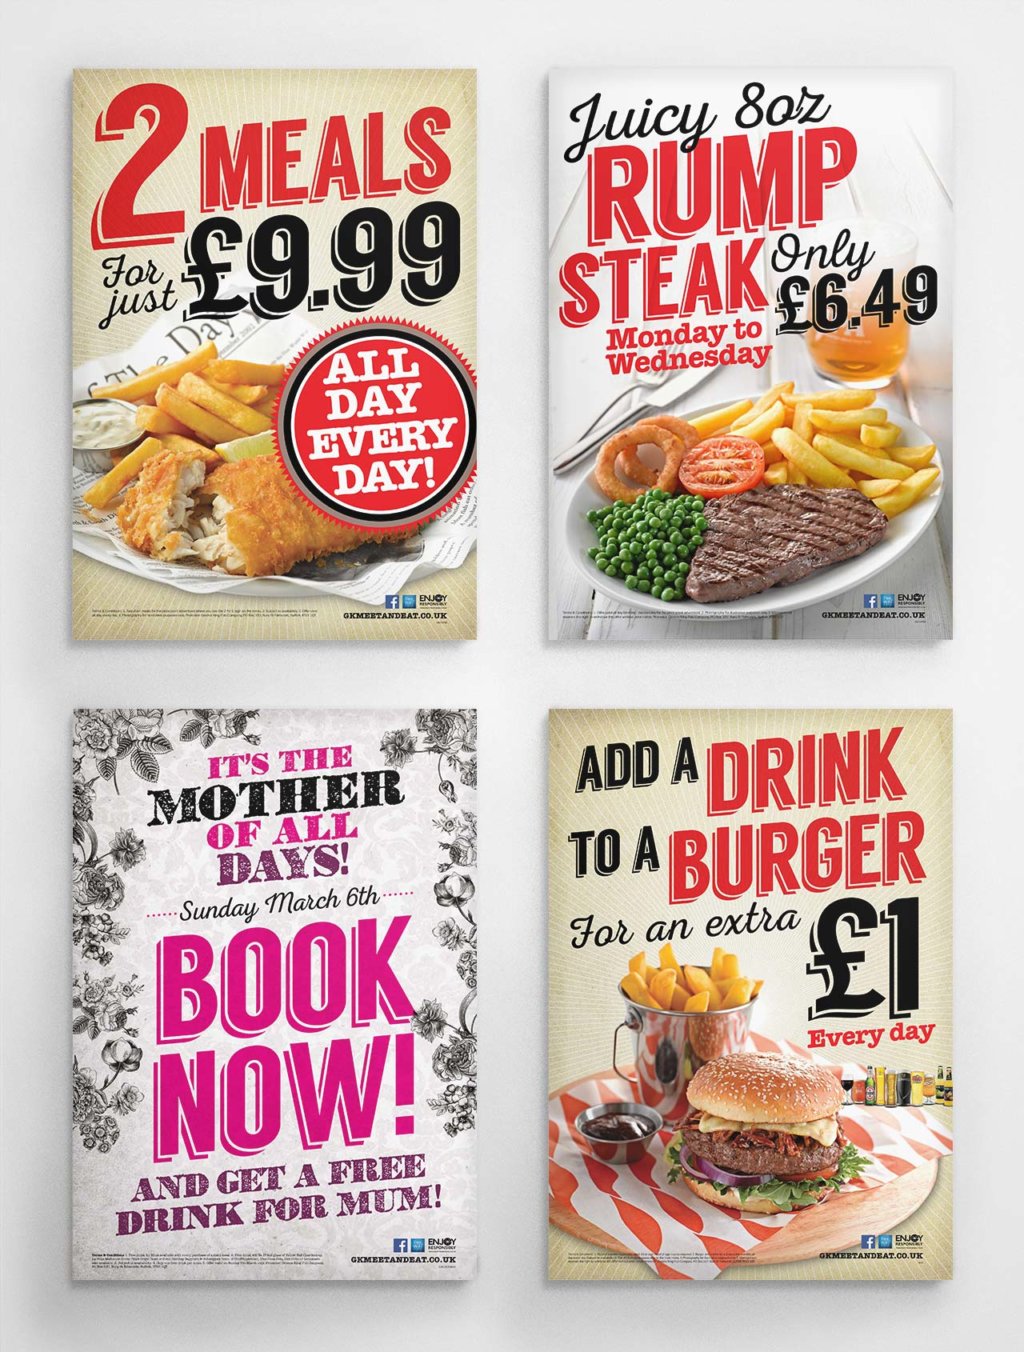 Greene King offer posters